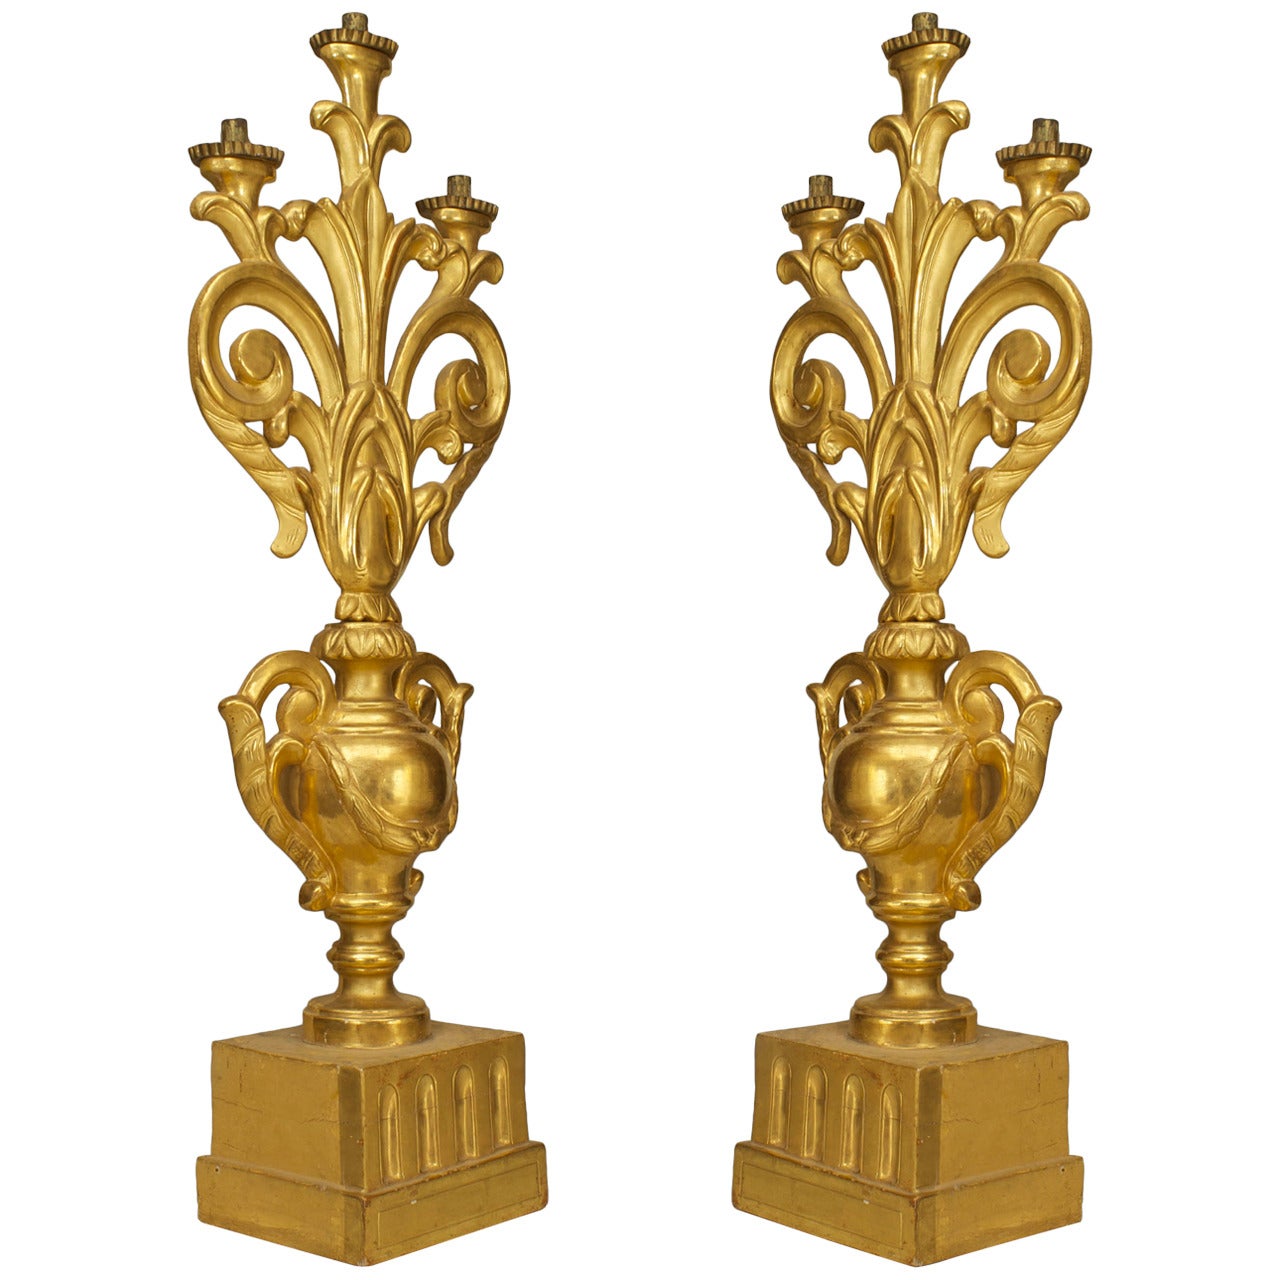 A Fine Pair of Italian Rococo Gilt Wood Candelabras For Sale